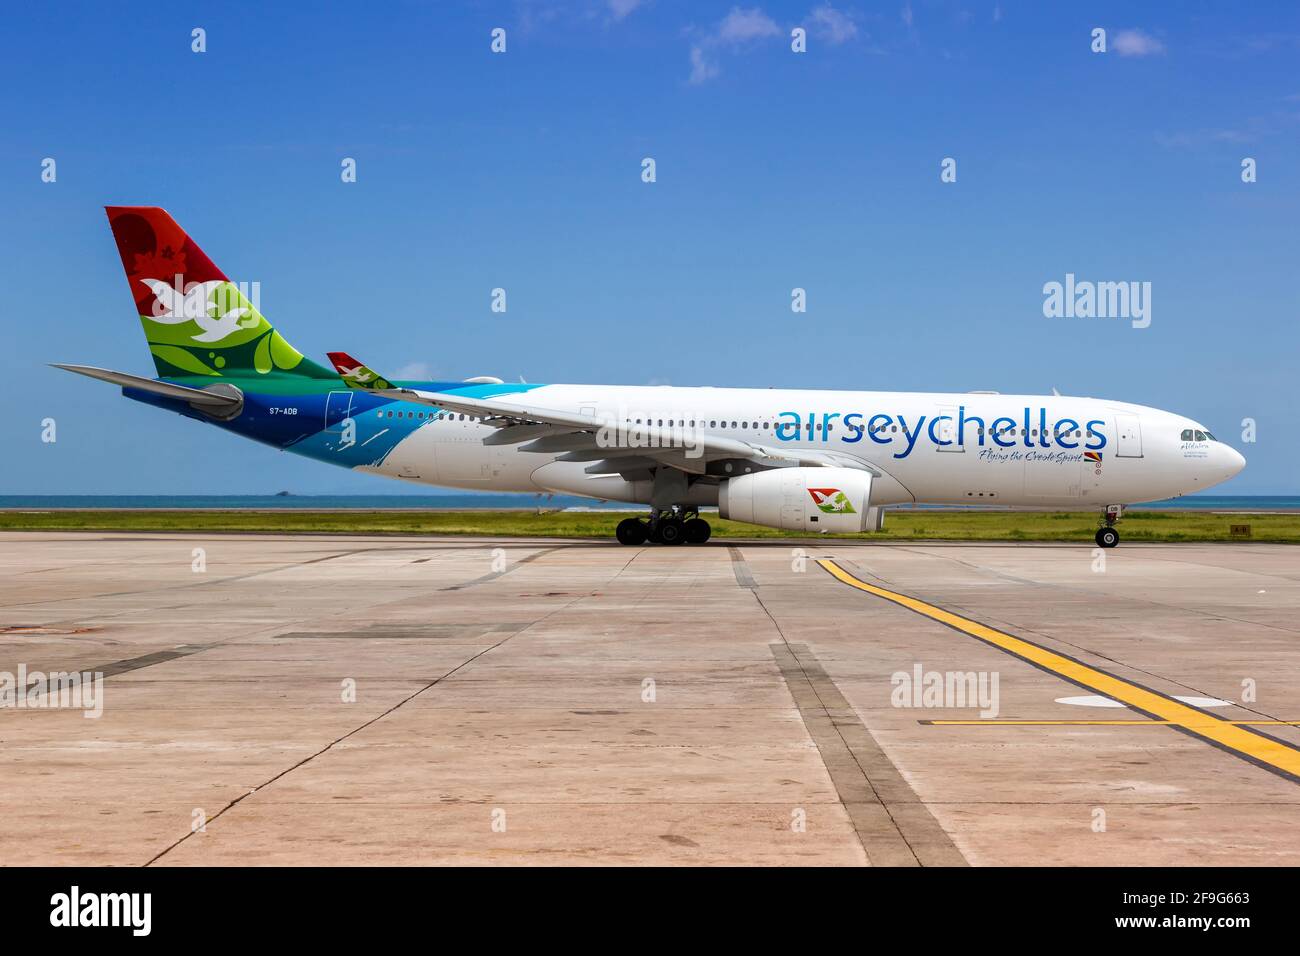 Mahe, Seychelles - November 26, 2017: Air Seychelles Airbus A330 airplane at Seychelles International Airport (SEZ) in the Seychelles. Airbus is a Eur Stock Photo